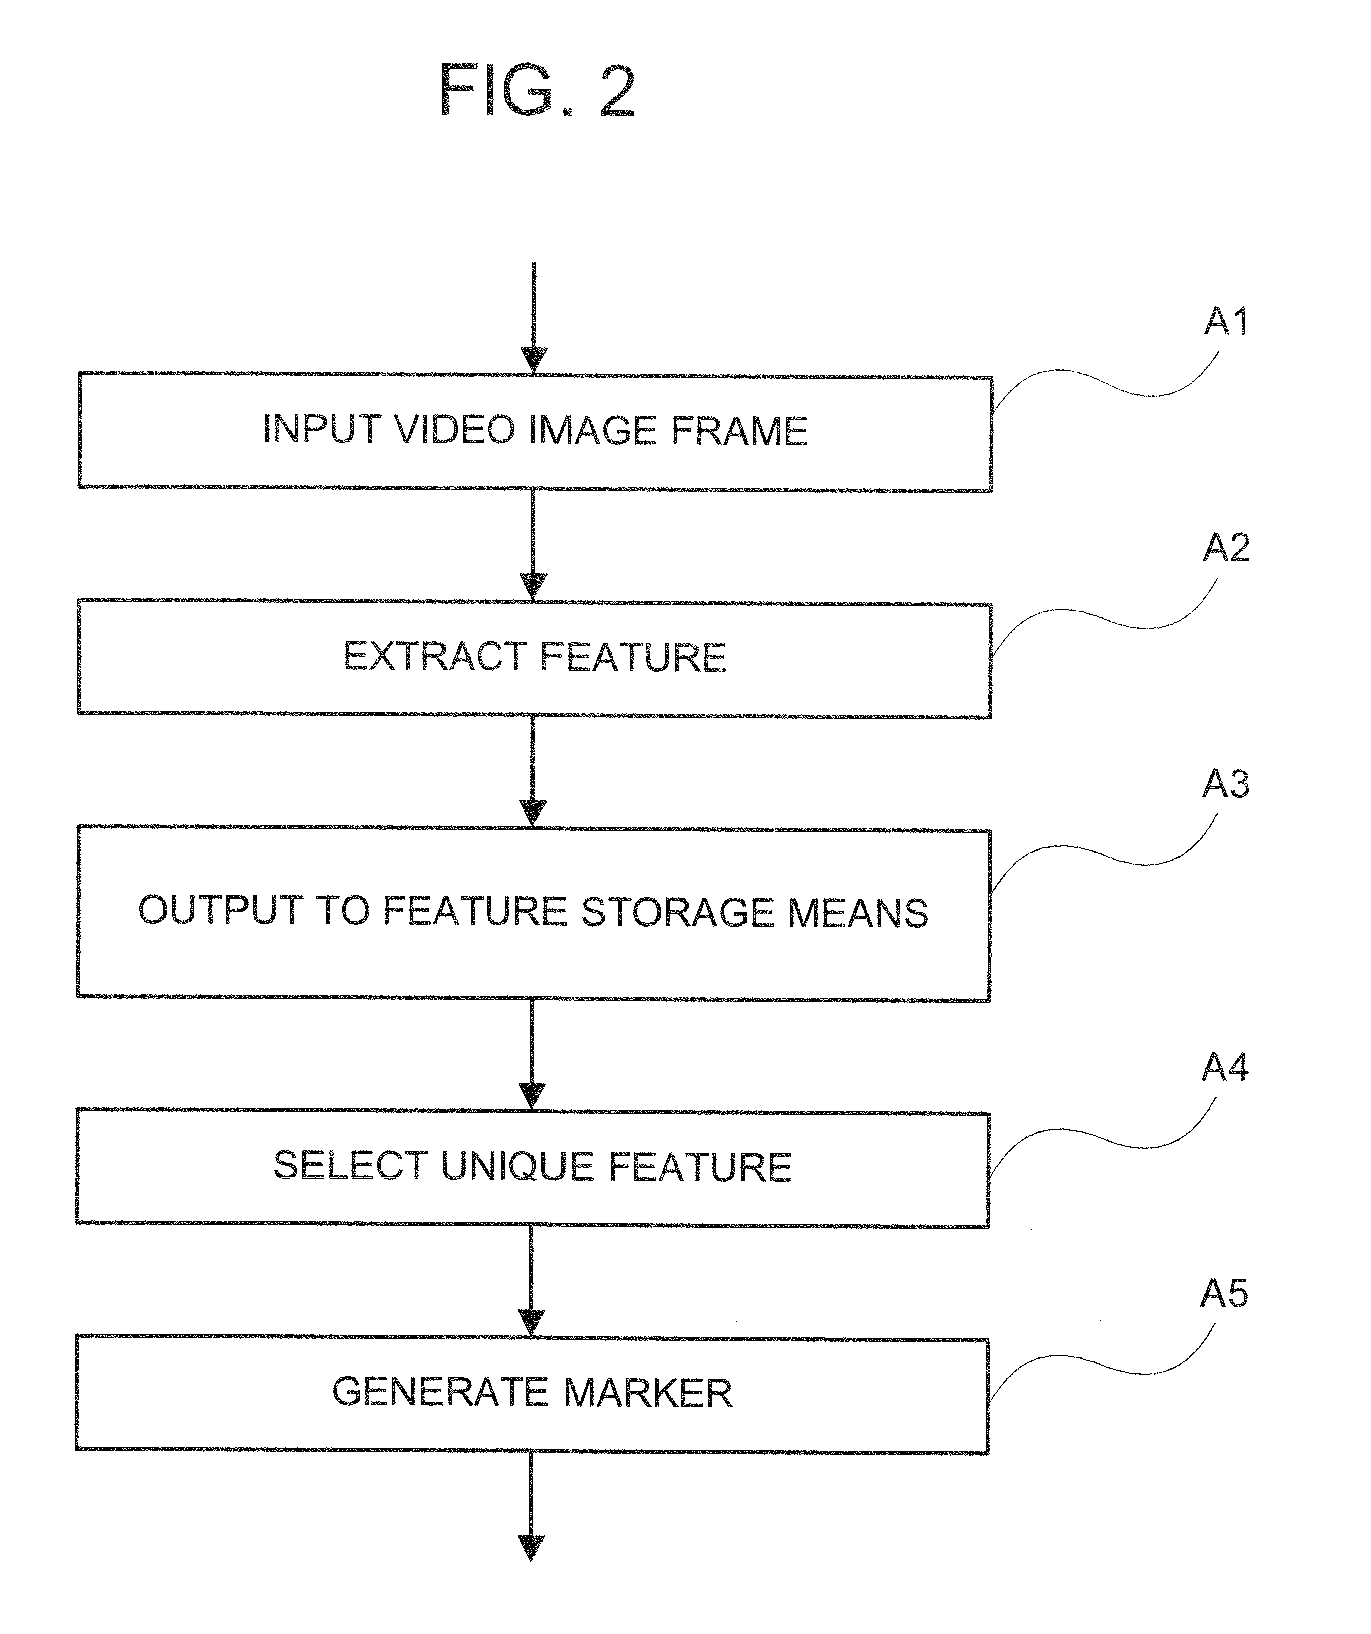 Marker generating and marker detecting system, method and program